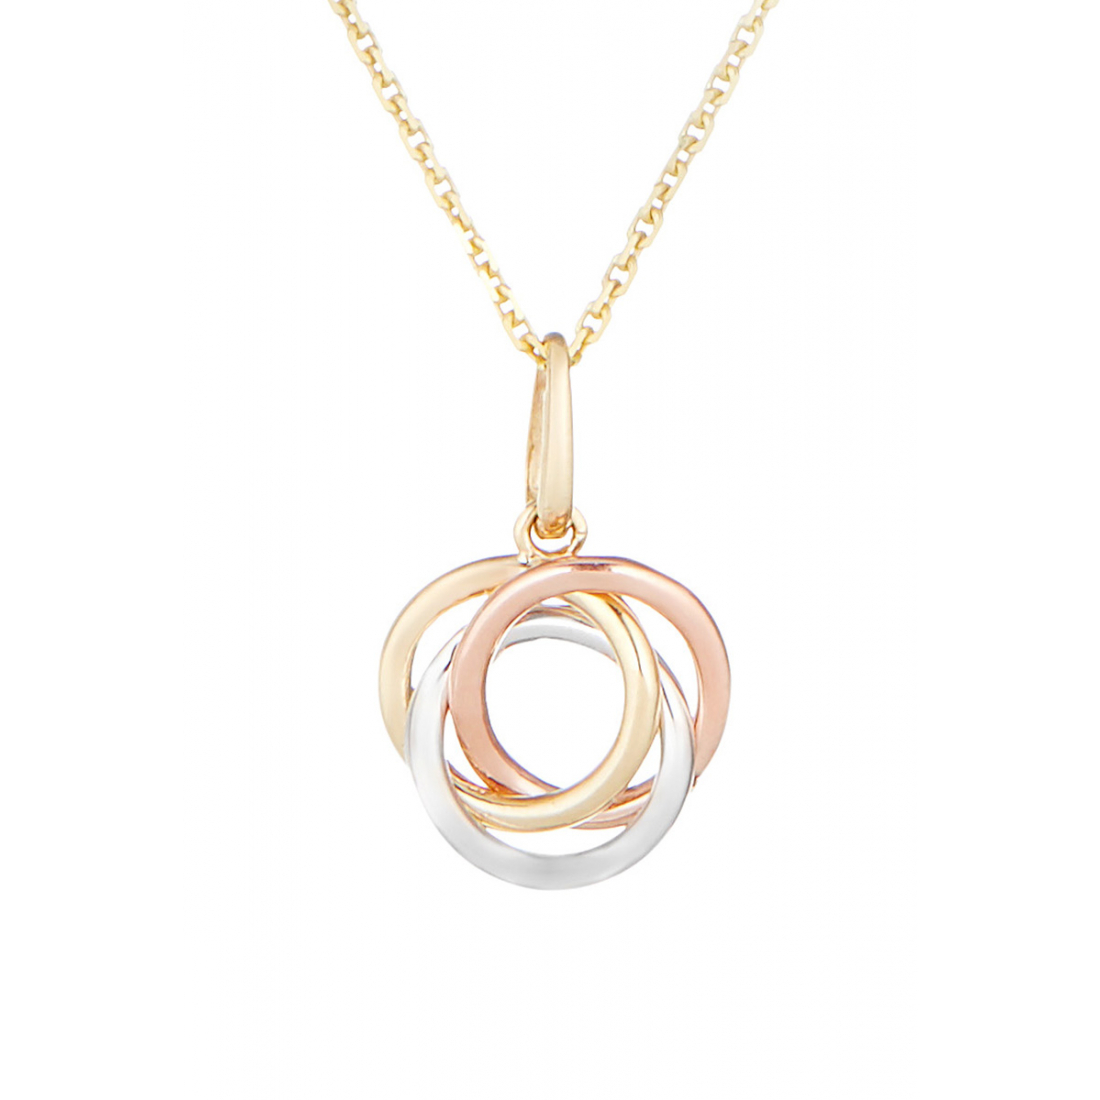 Women's 'Croisade' Pendant with chain